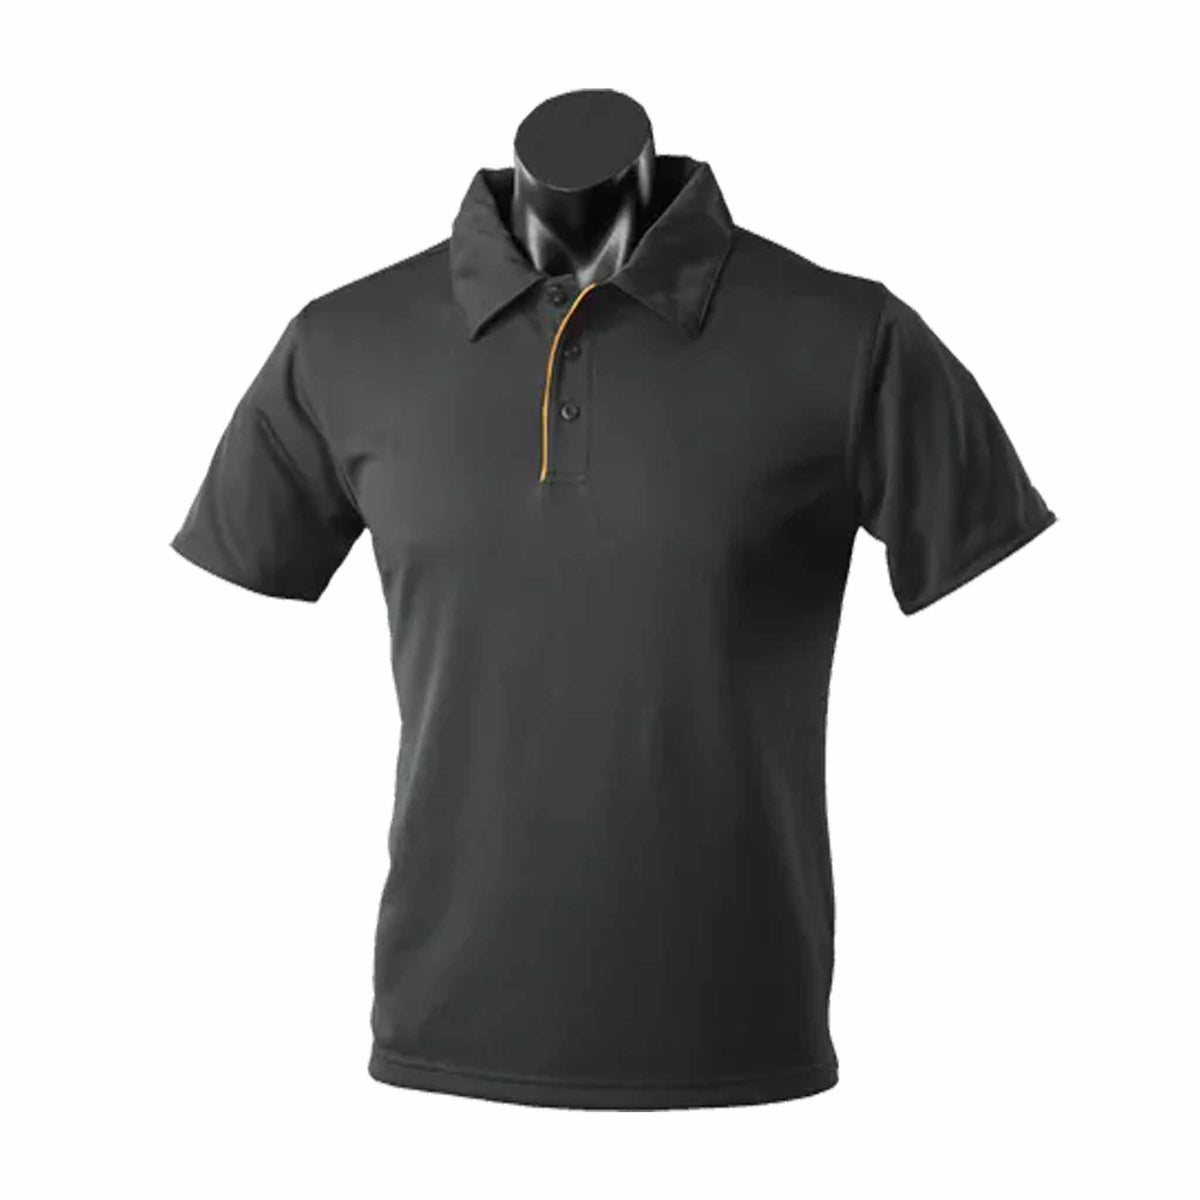 aussie pacific yarra mens polo in black gold